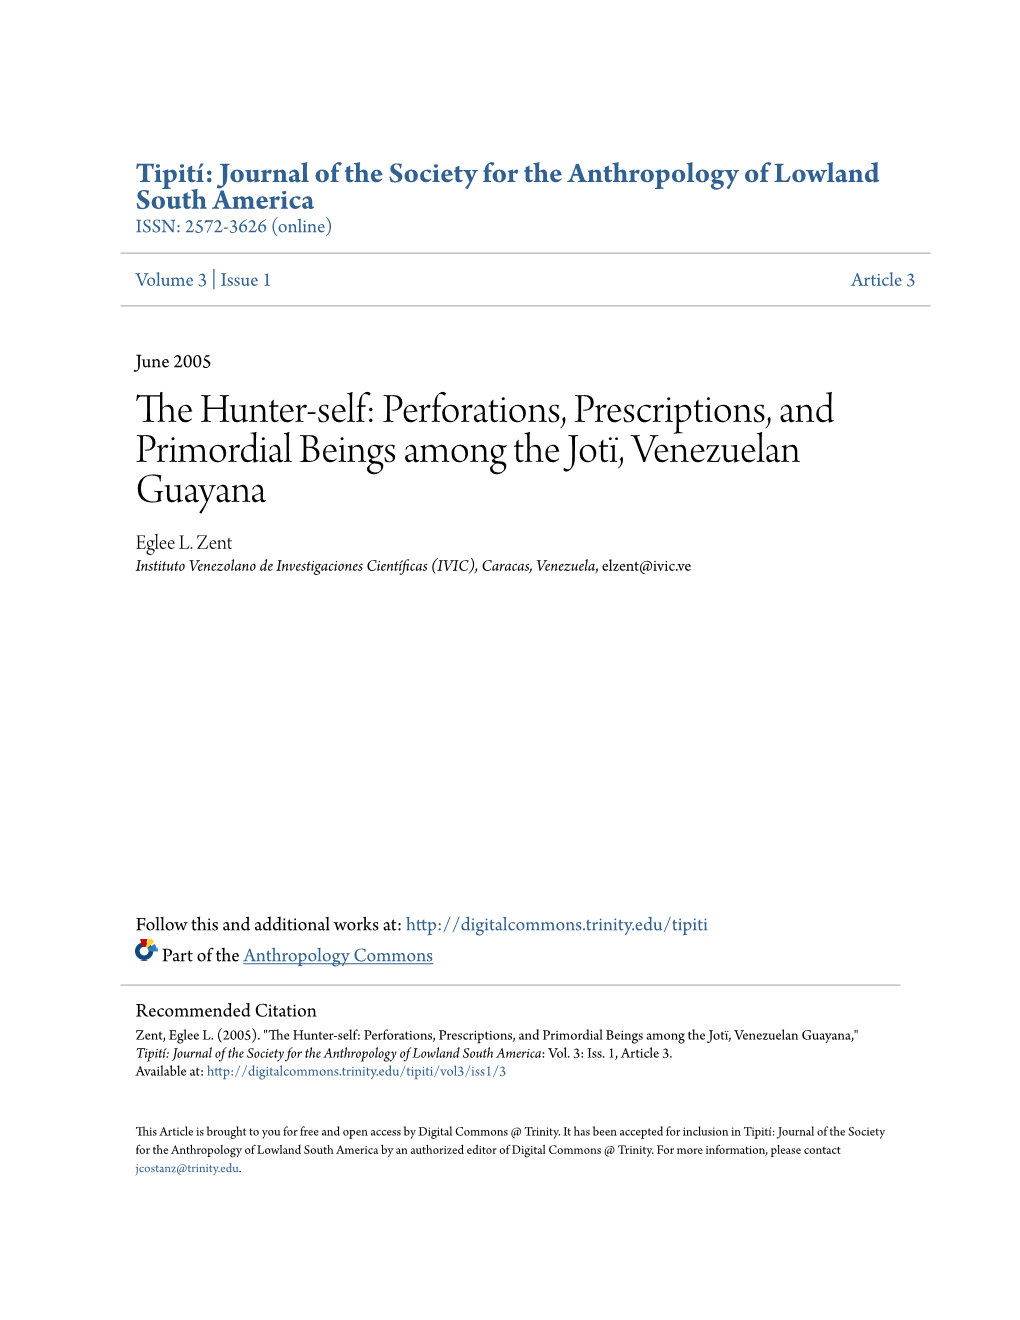 The Hunter-Self: Perforations, Prescriptions, and Primordial Beings Among the Jotï, Venezuelan Guayana